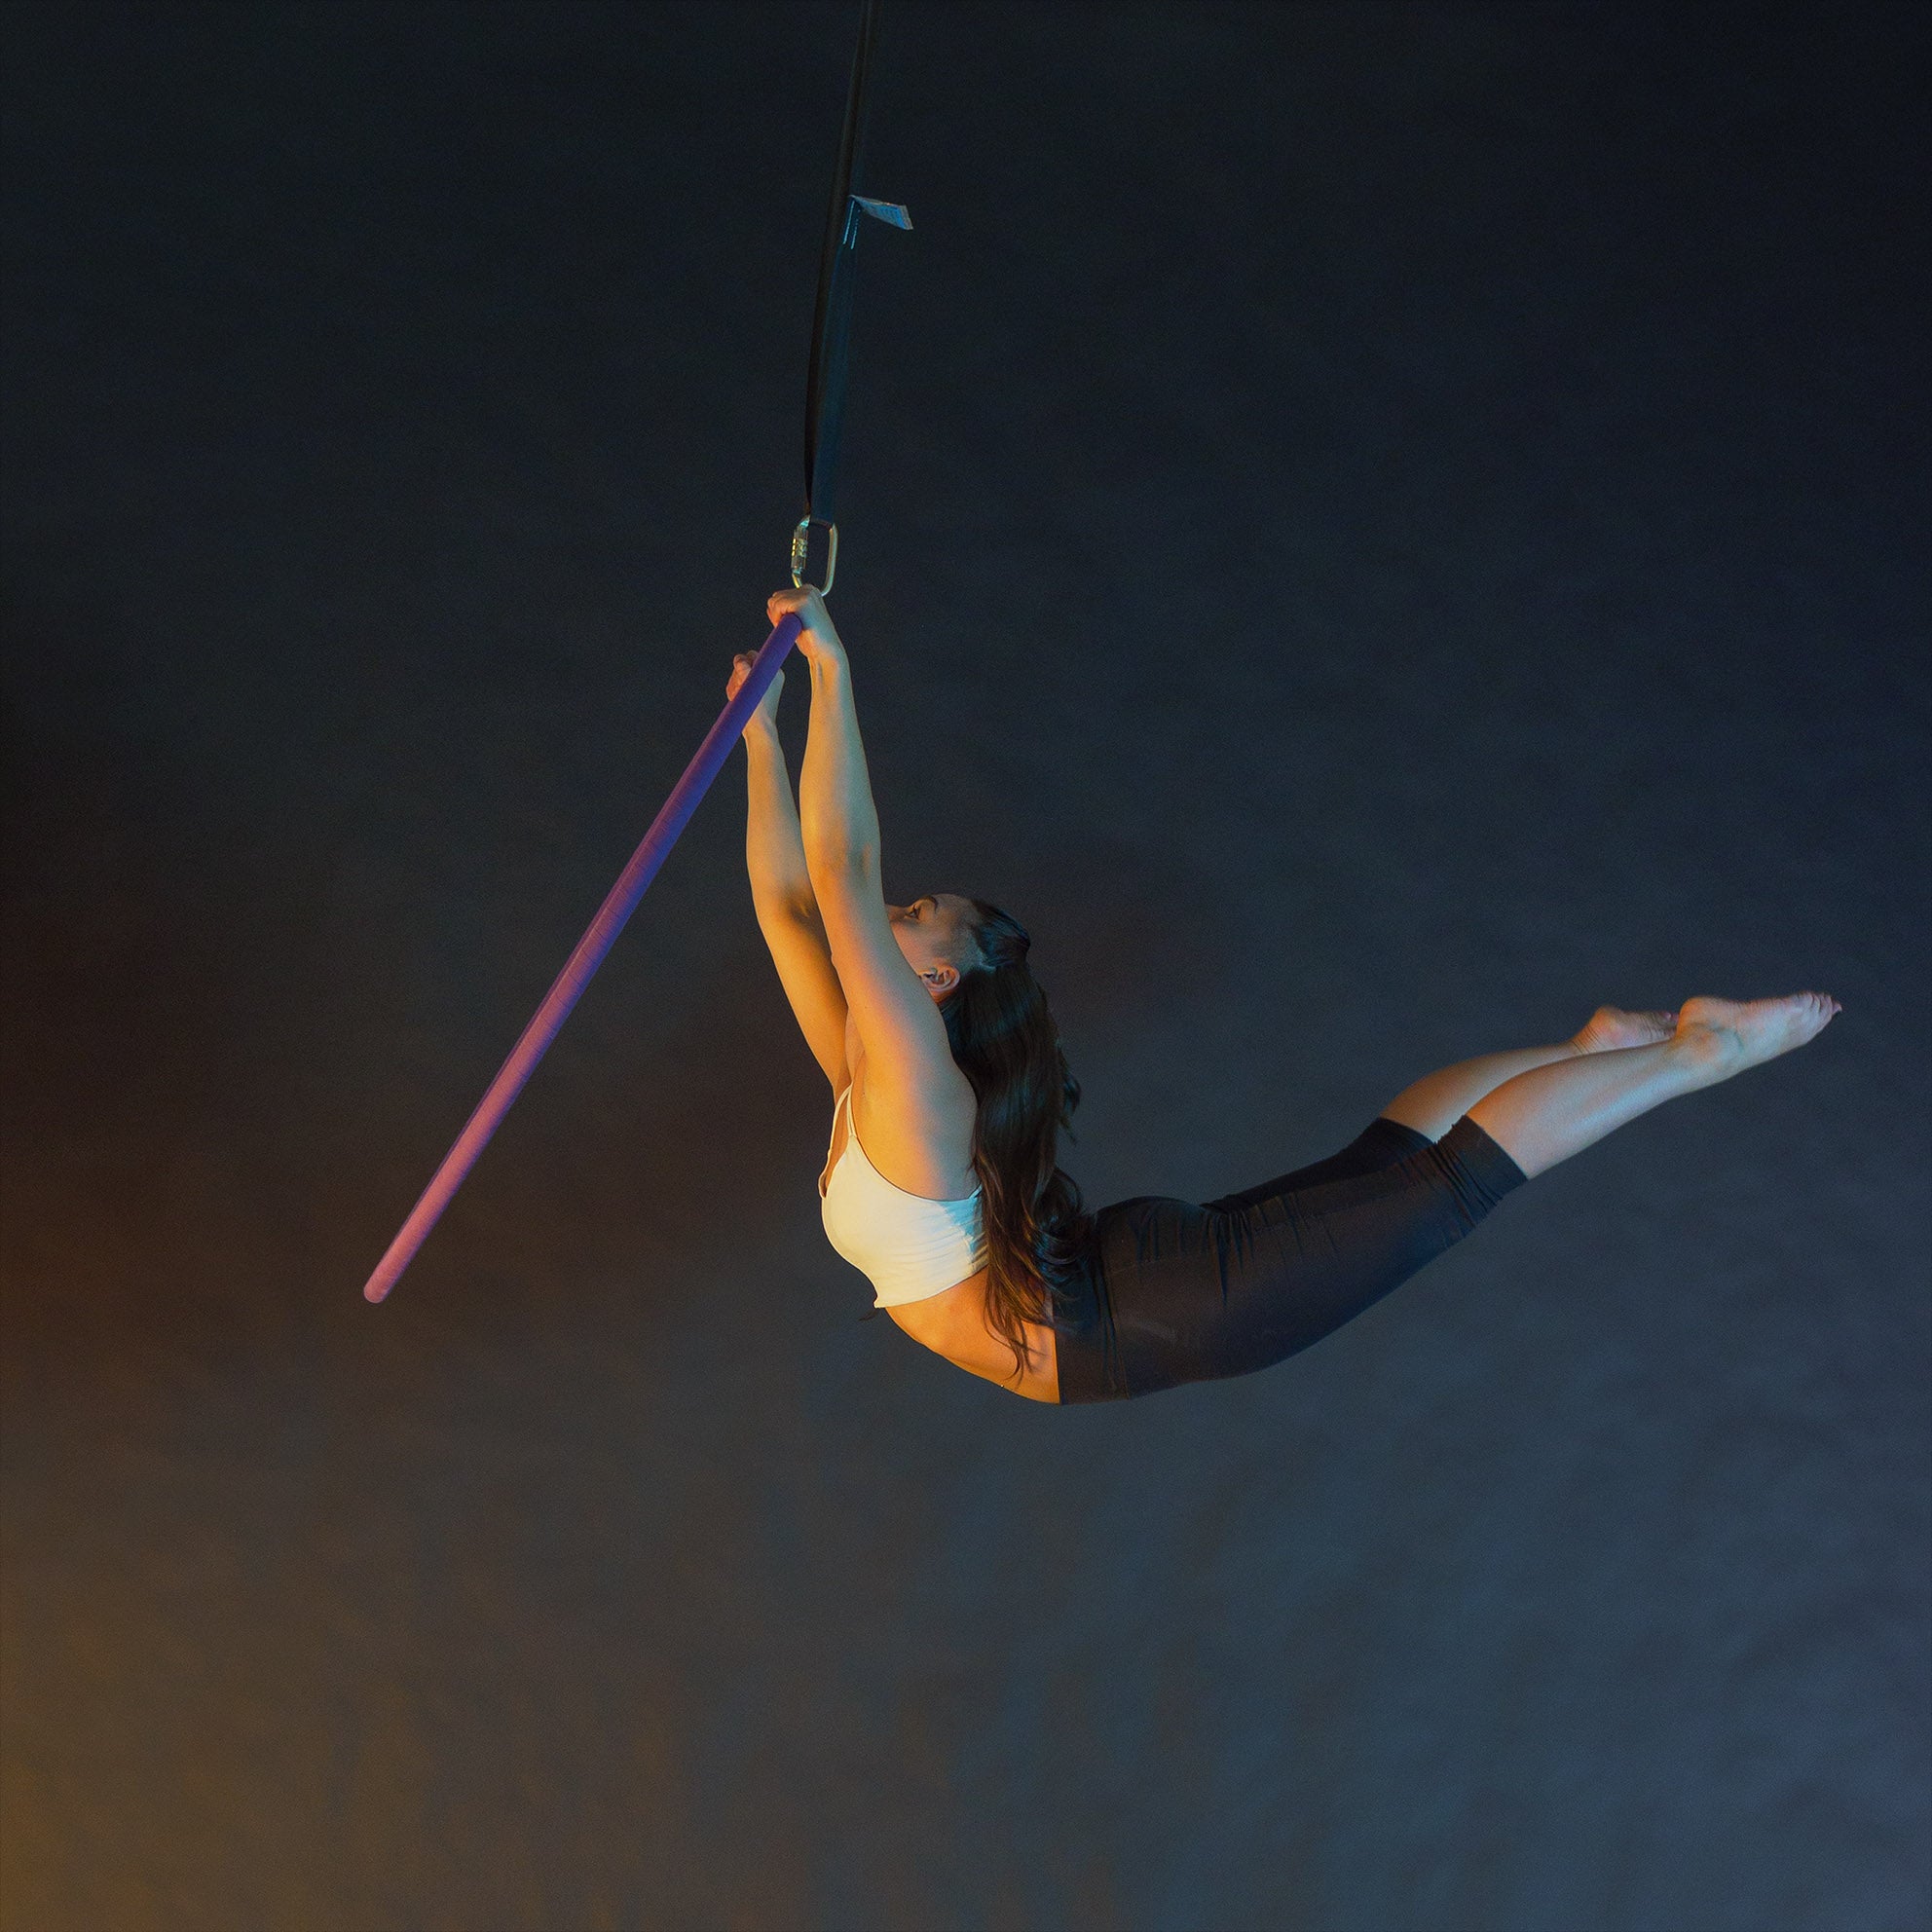 Performer hanging from 1 point aerial hoop